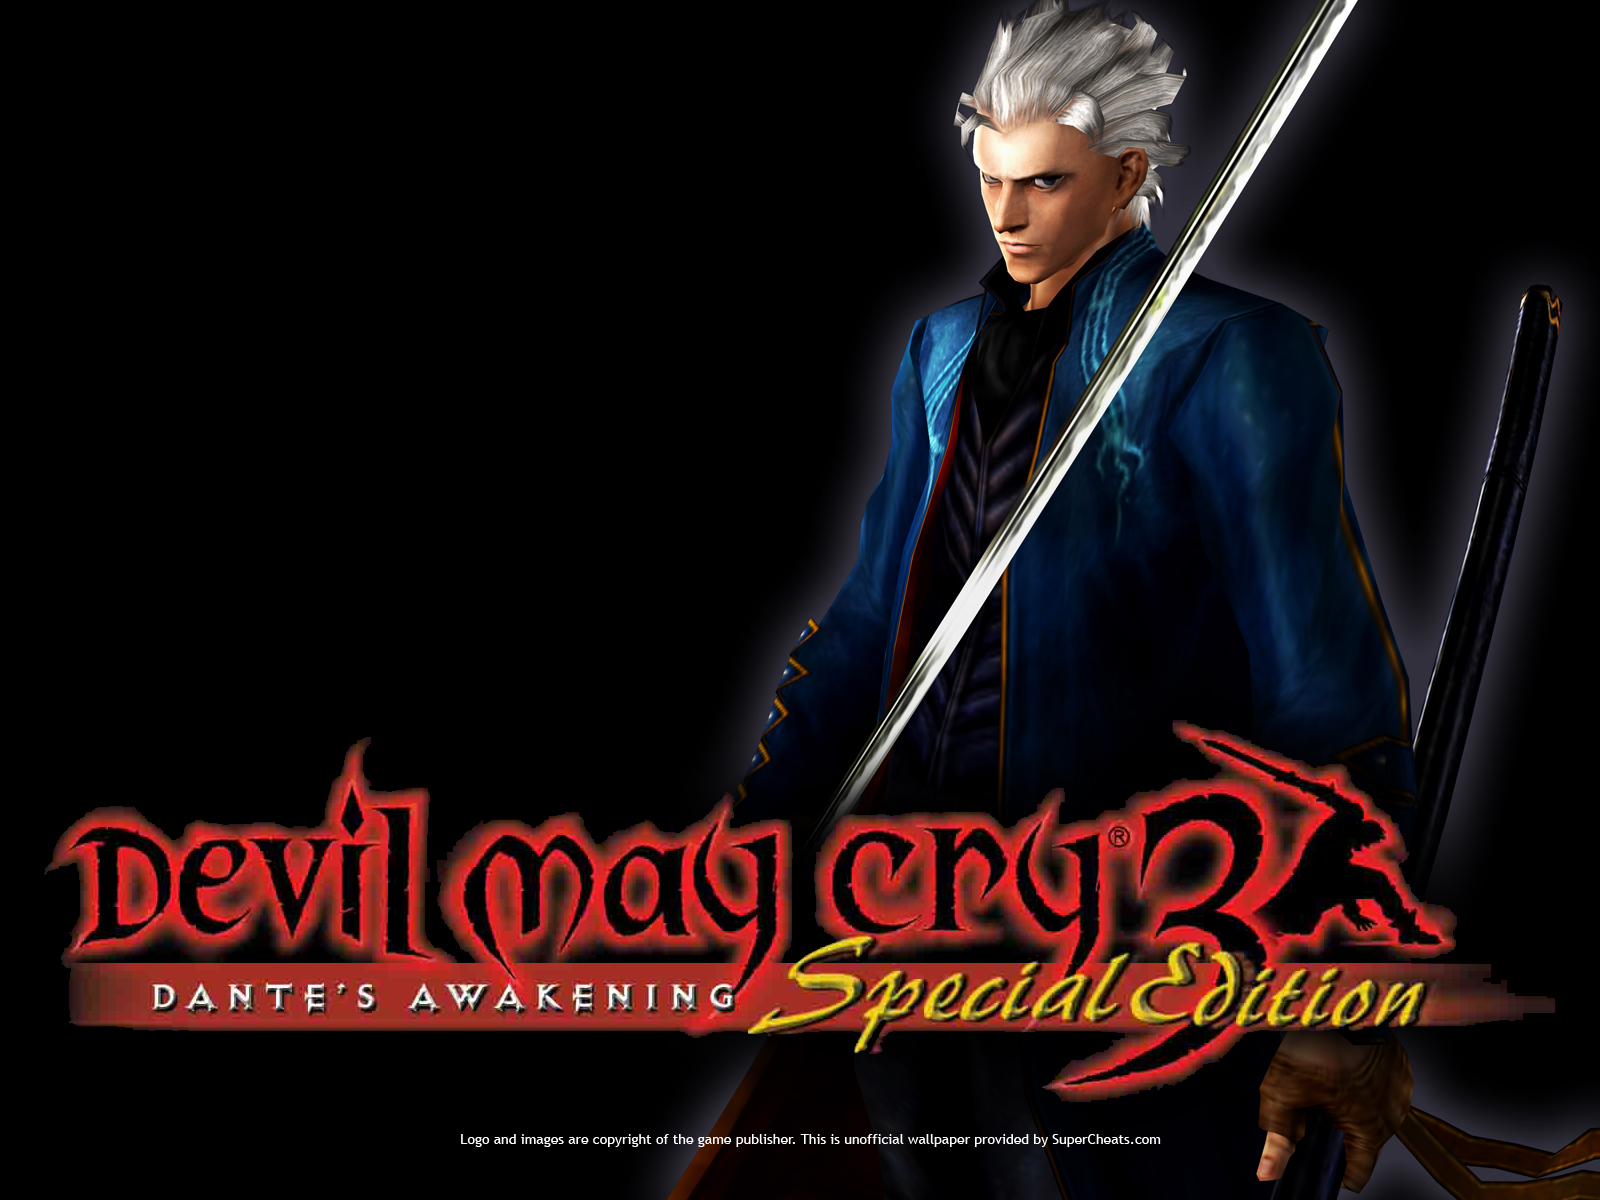 Devil+may+cry+3+pc+requirements